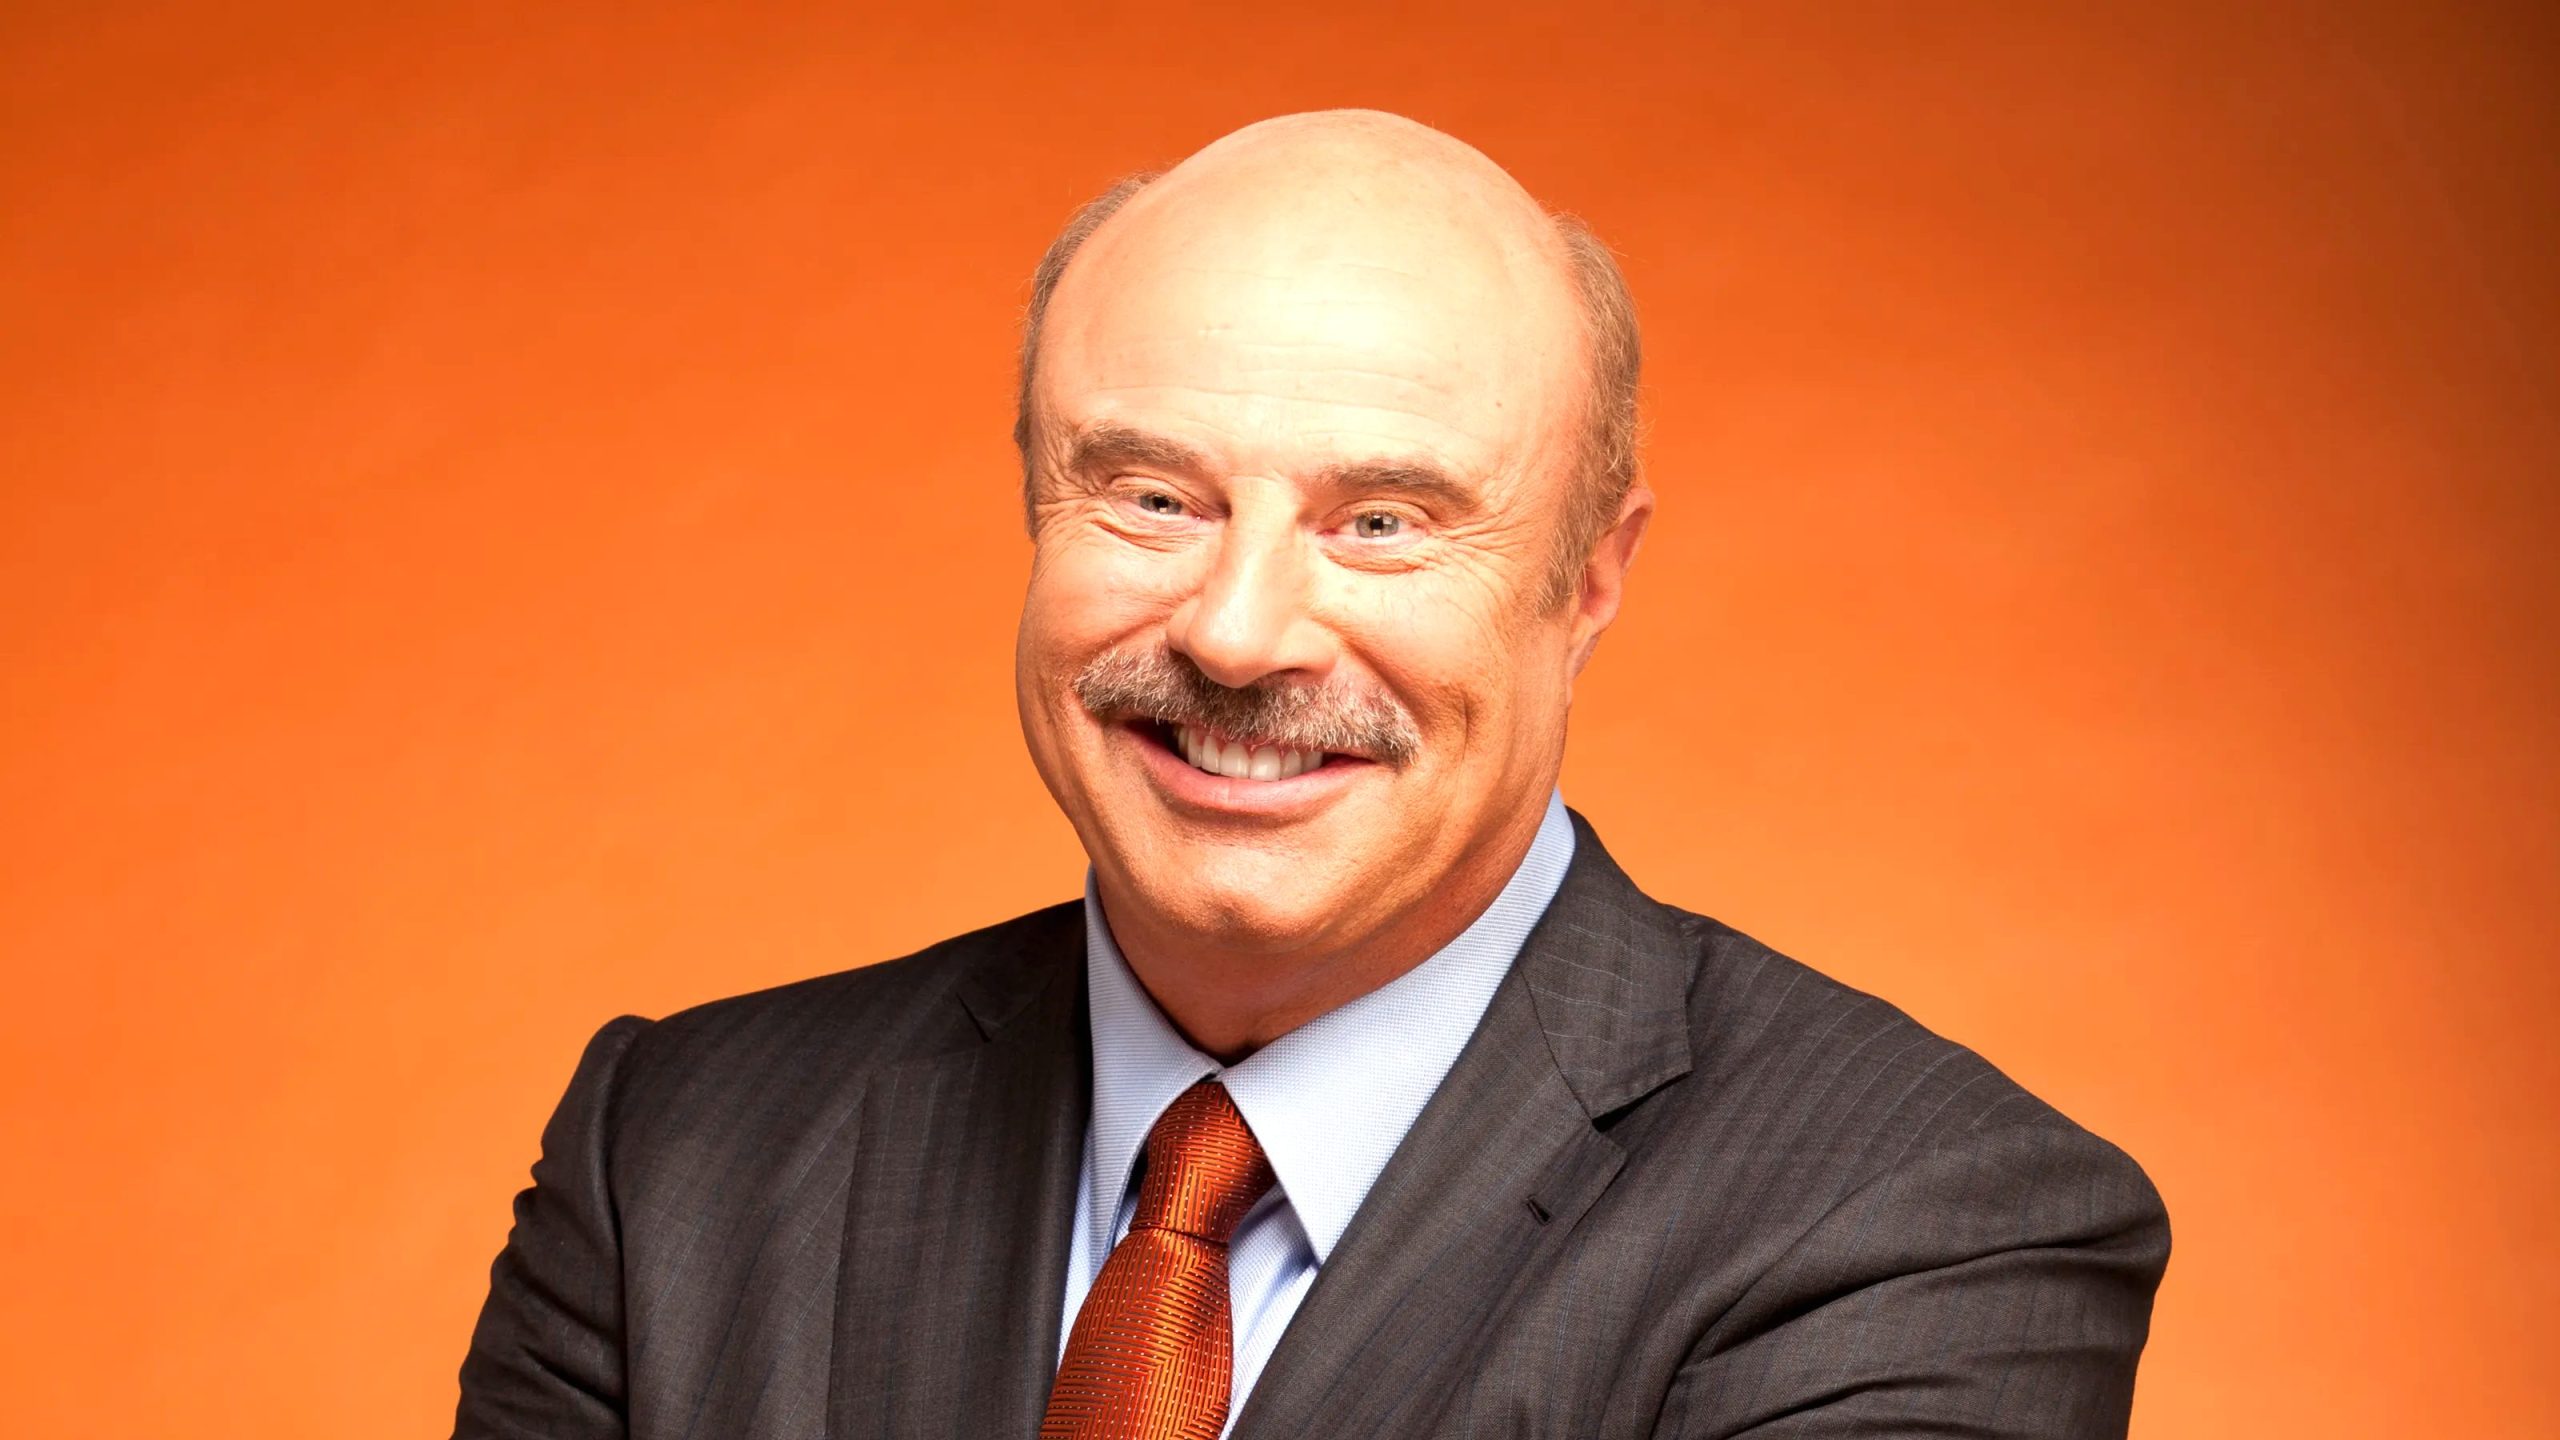 'Dr. Phil' Talk Show Journey Coming To End After 21 Seasons Dr. Phil